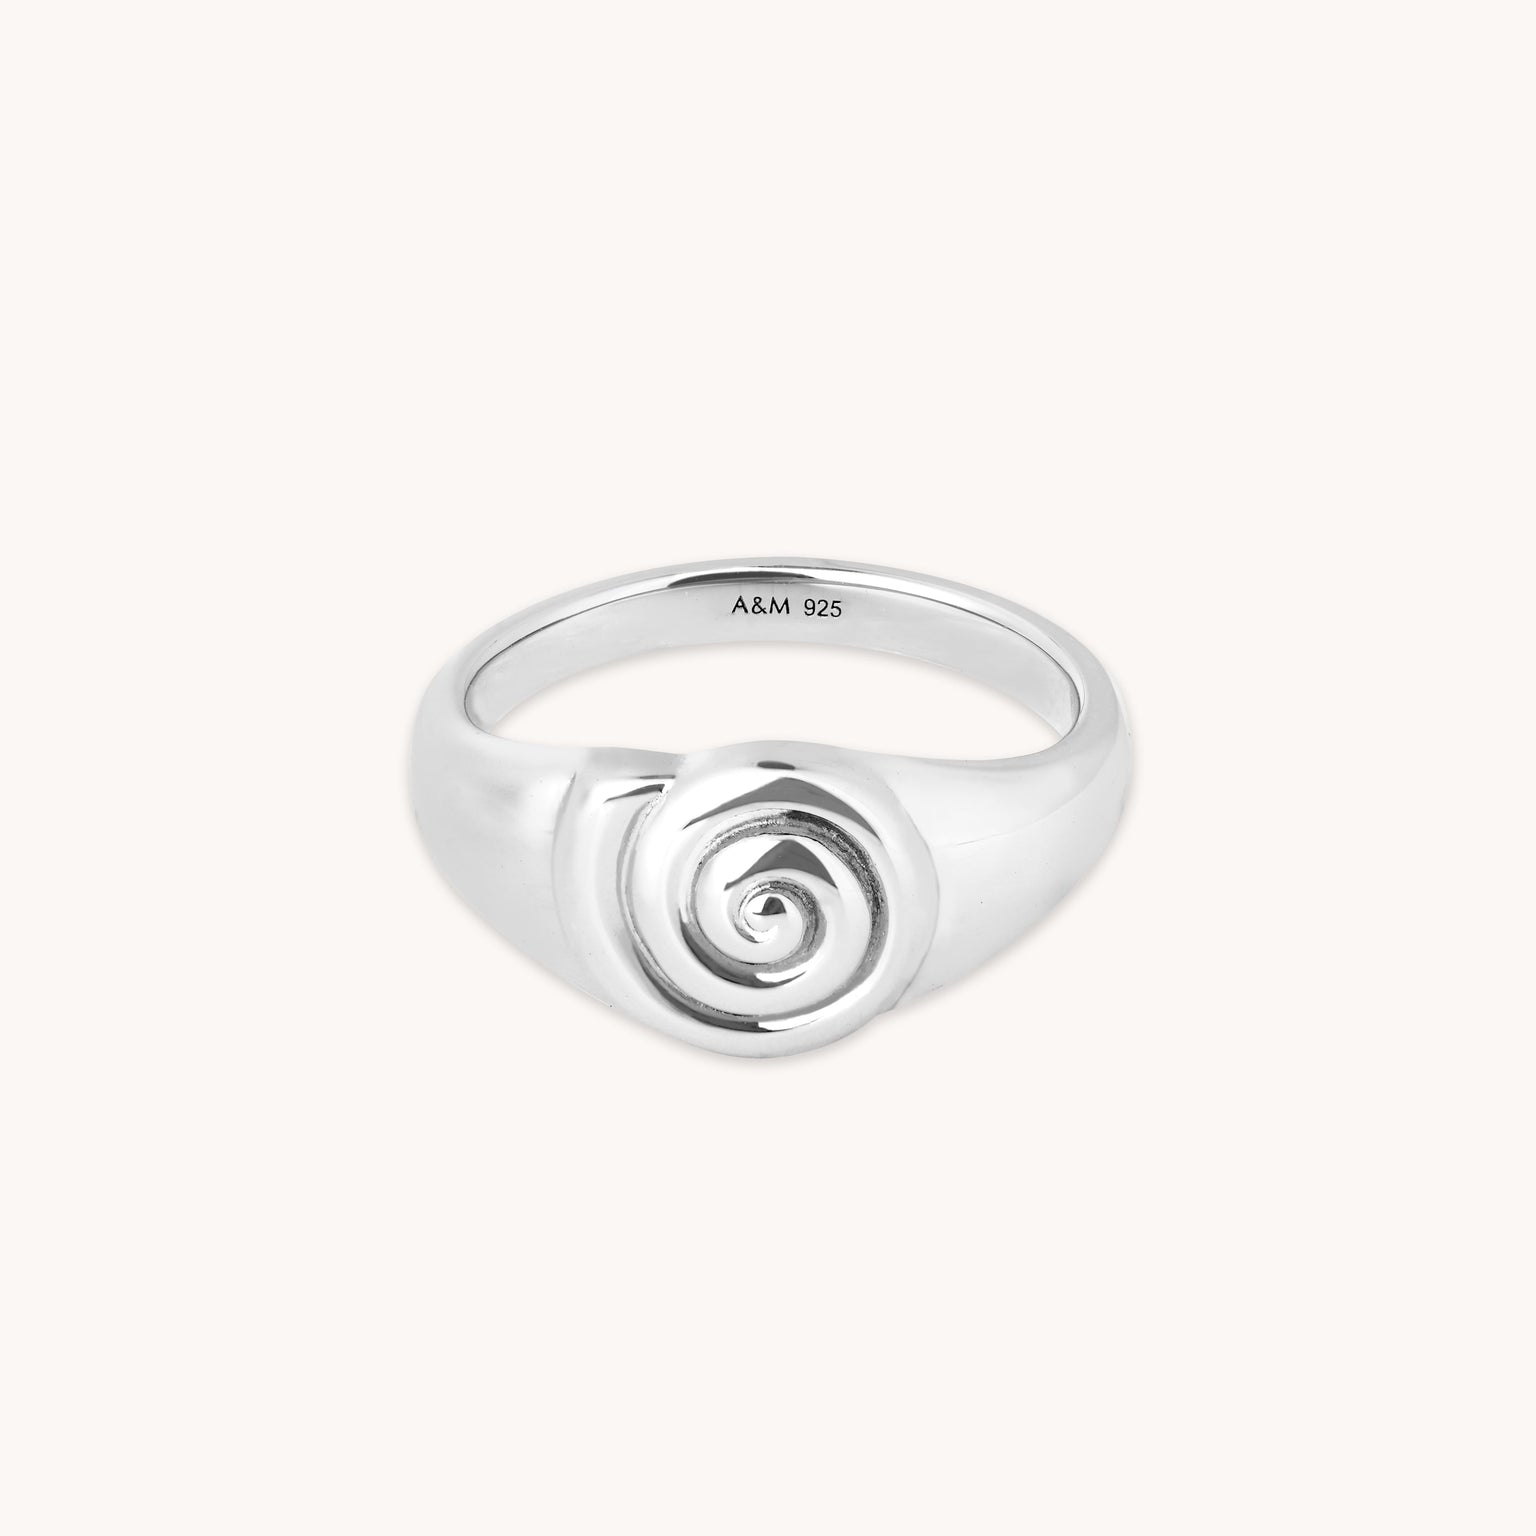 Shell Signet Ring in Silver